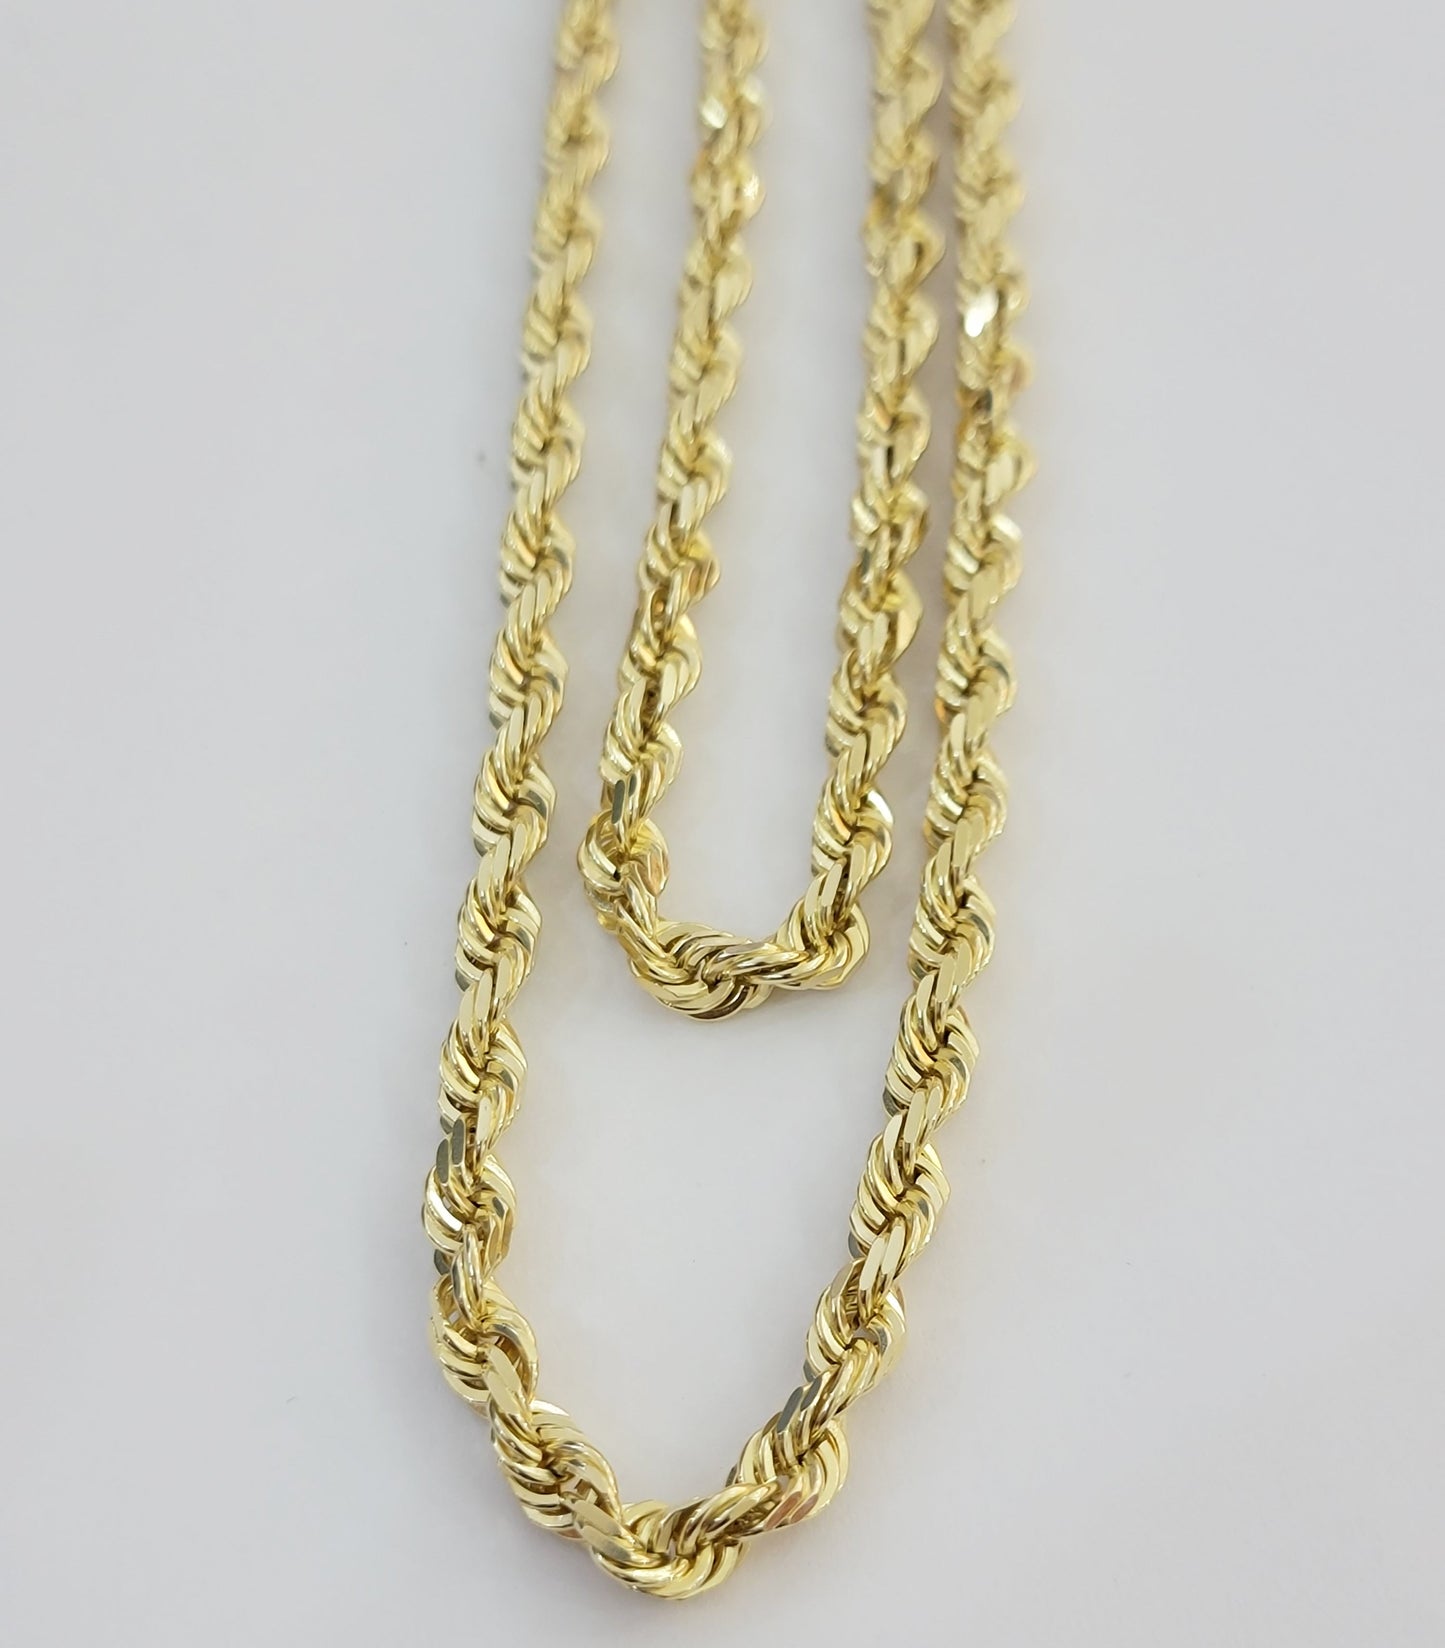 14k Yellow Gold Rope Chain Solid Necklace 6mm 28" Dimond Cut 14KT Real Gold Sale